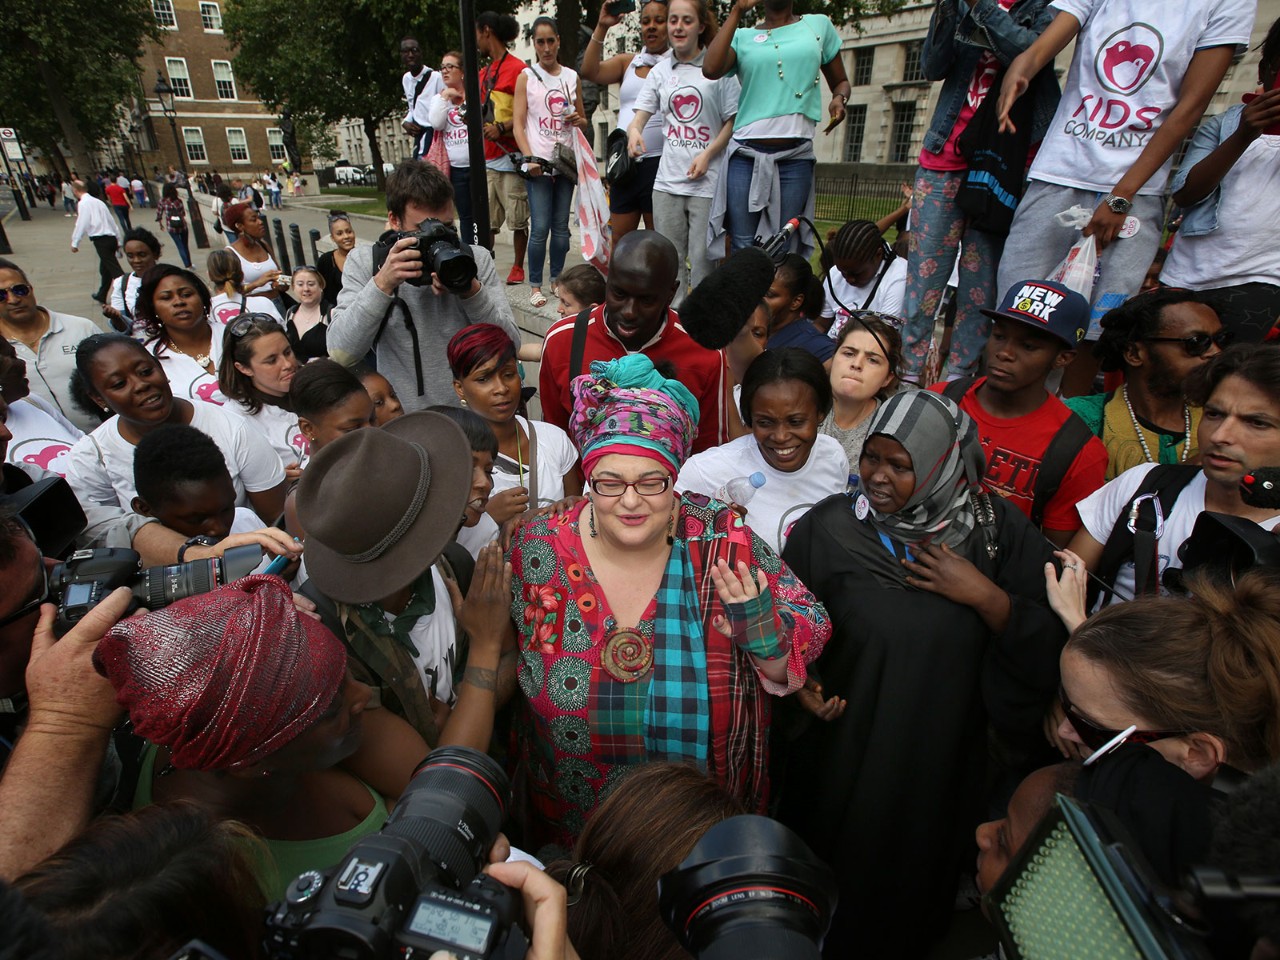 Kids Company founder Camila Batmanghelidjh at a rally outside Downing Street in August 2015 after the government withdrew funding following allegations of sexual assault and financial mismanagement